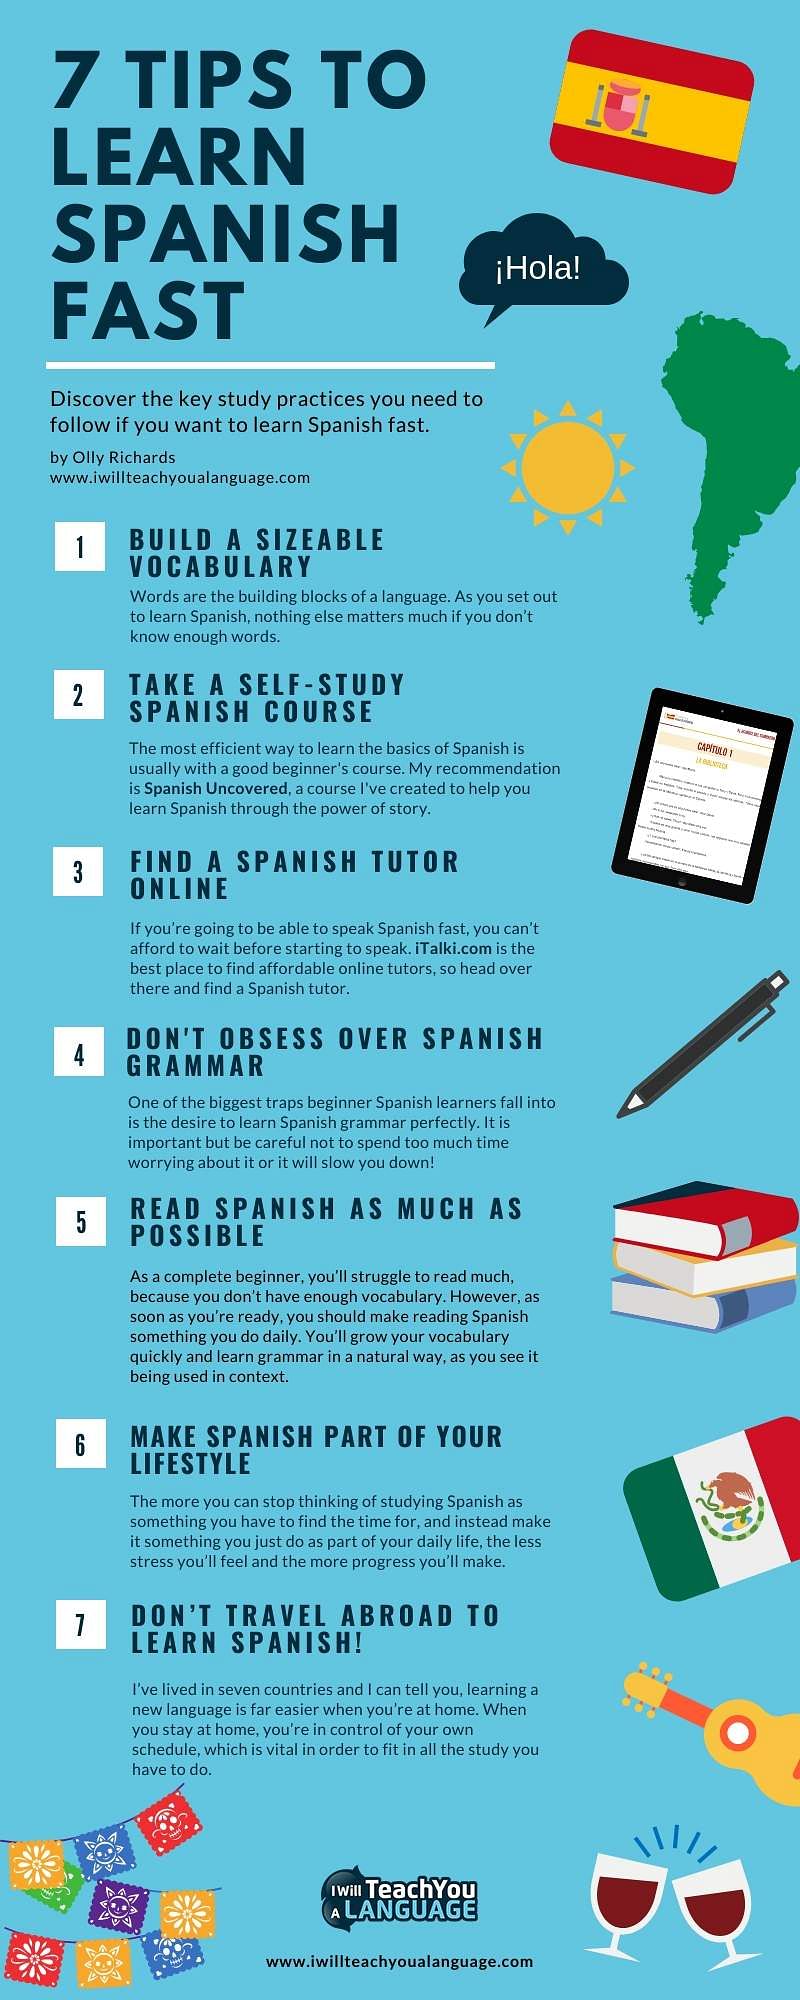 Partnership International - Do you want to speak Spanish? 🇪🇦️💃 Do you  want to know how to learn fast? Take a look at our best 5 Tips! 🤗